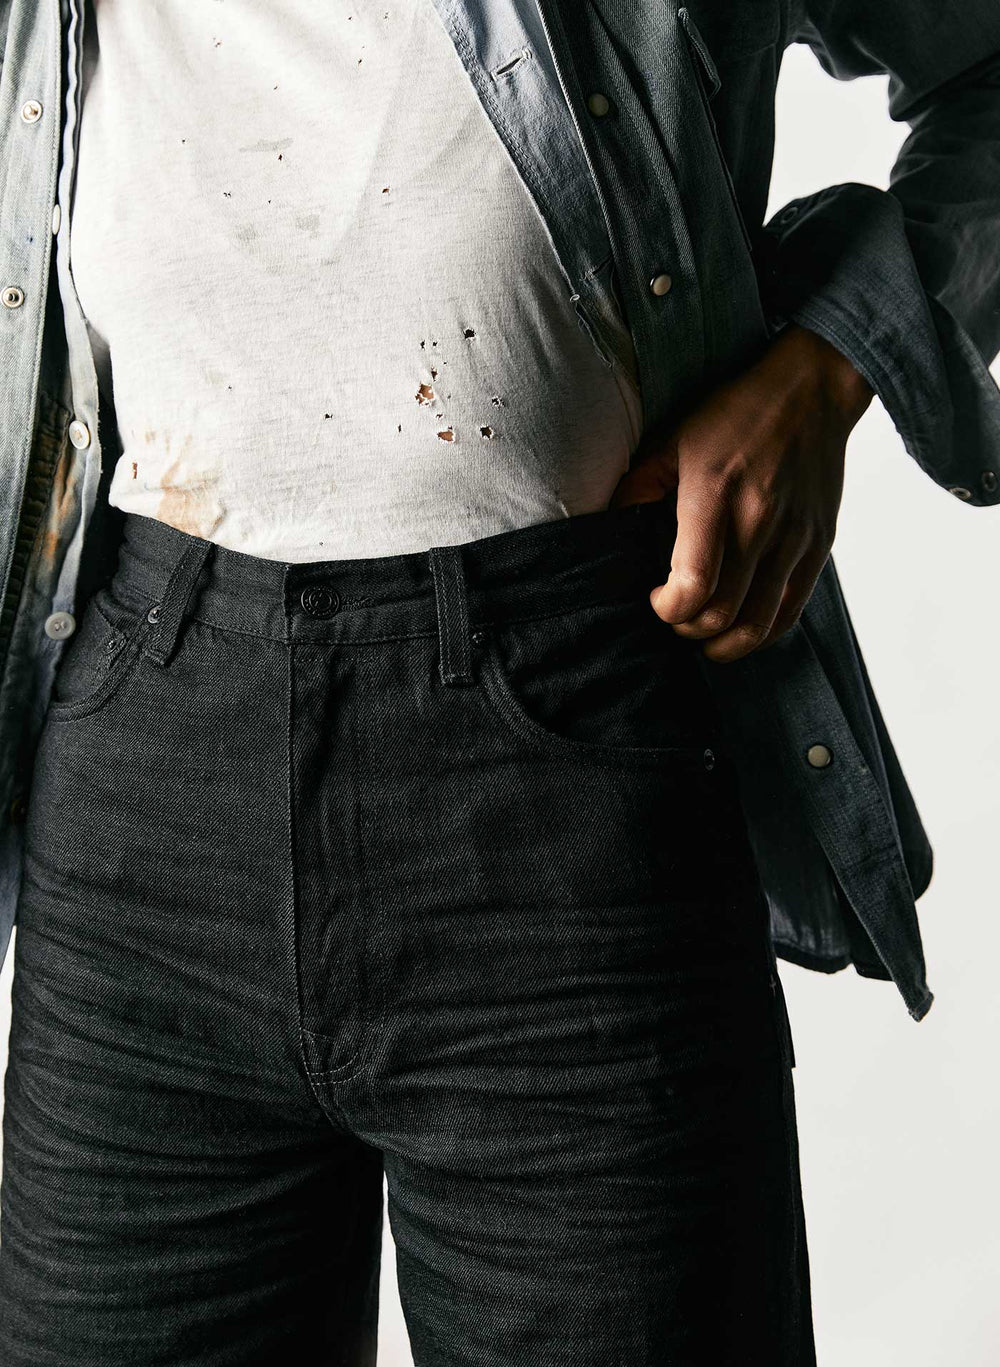 A closeup of extra high rise black American-made jeans.